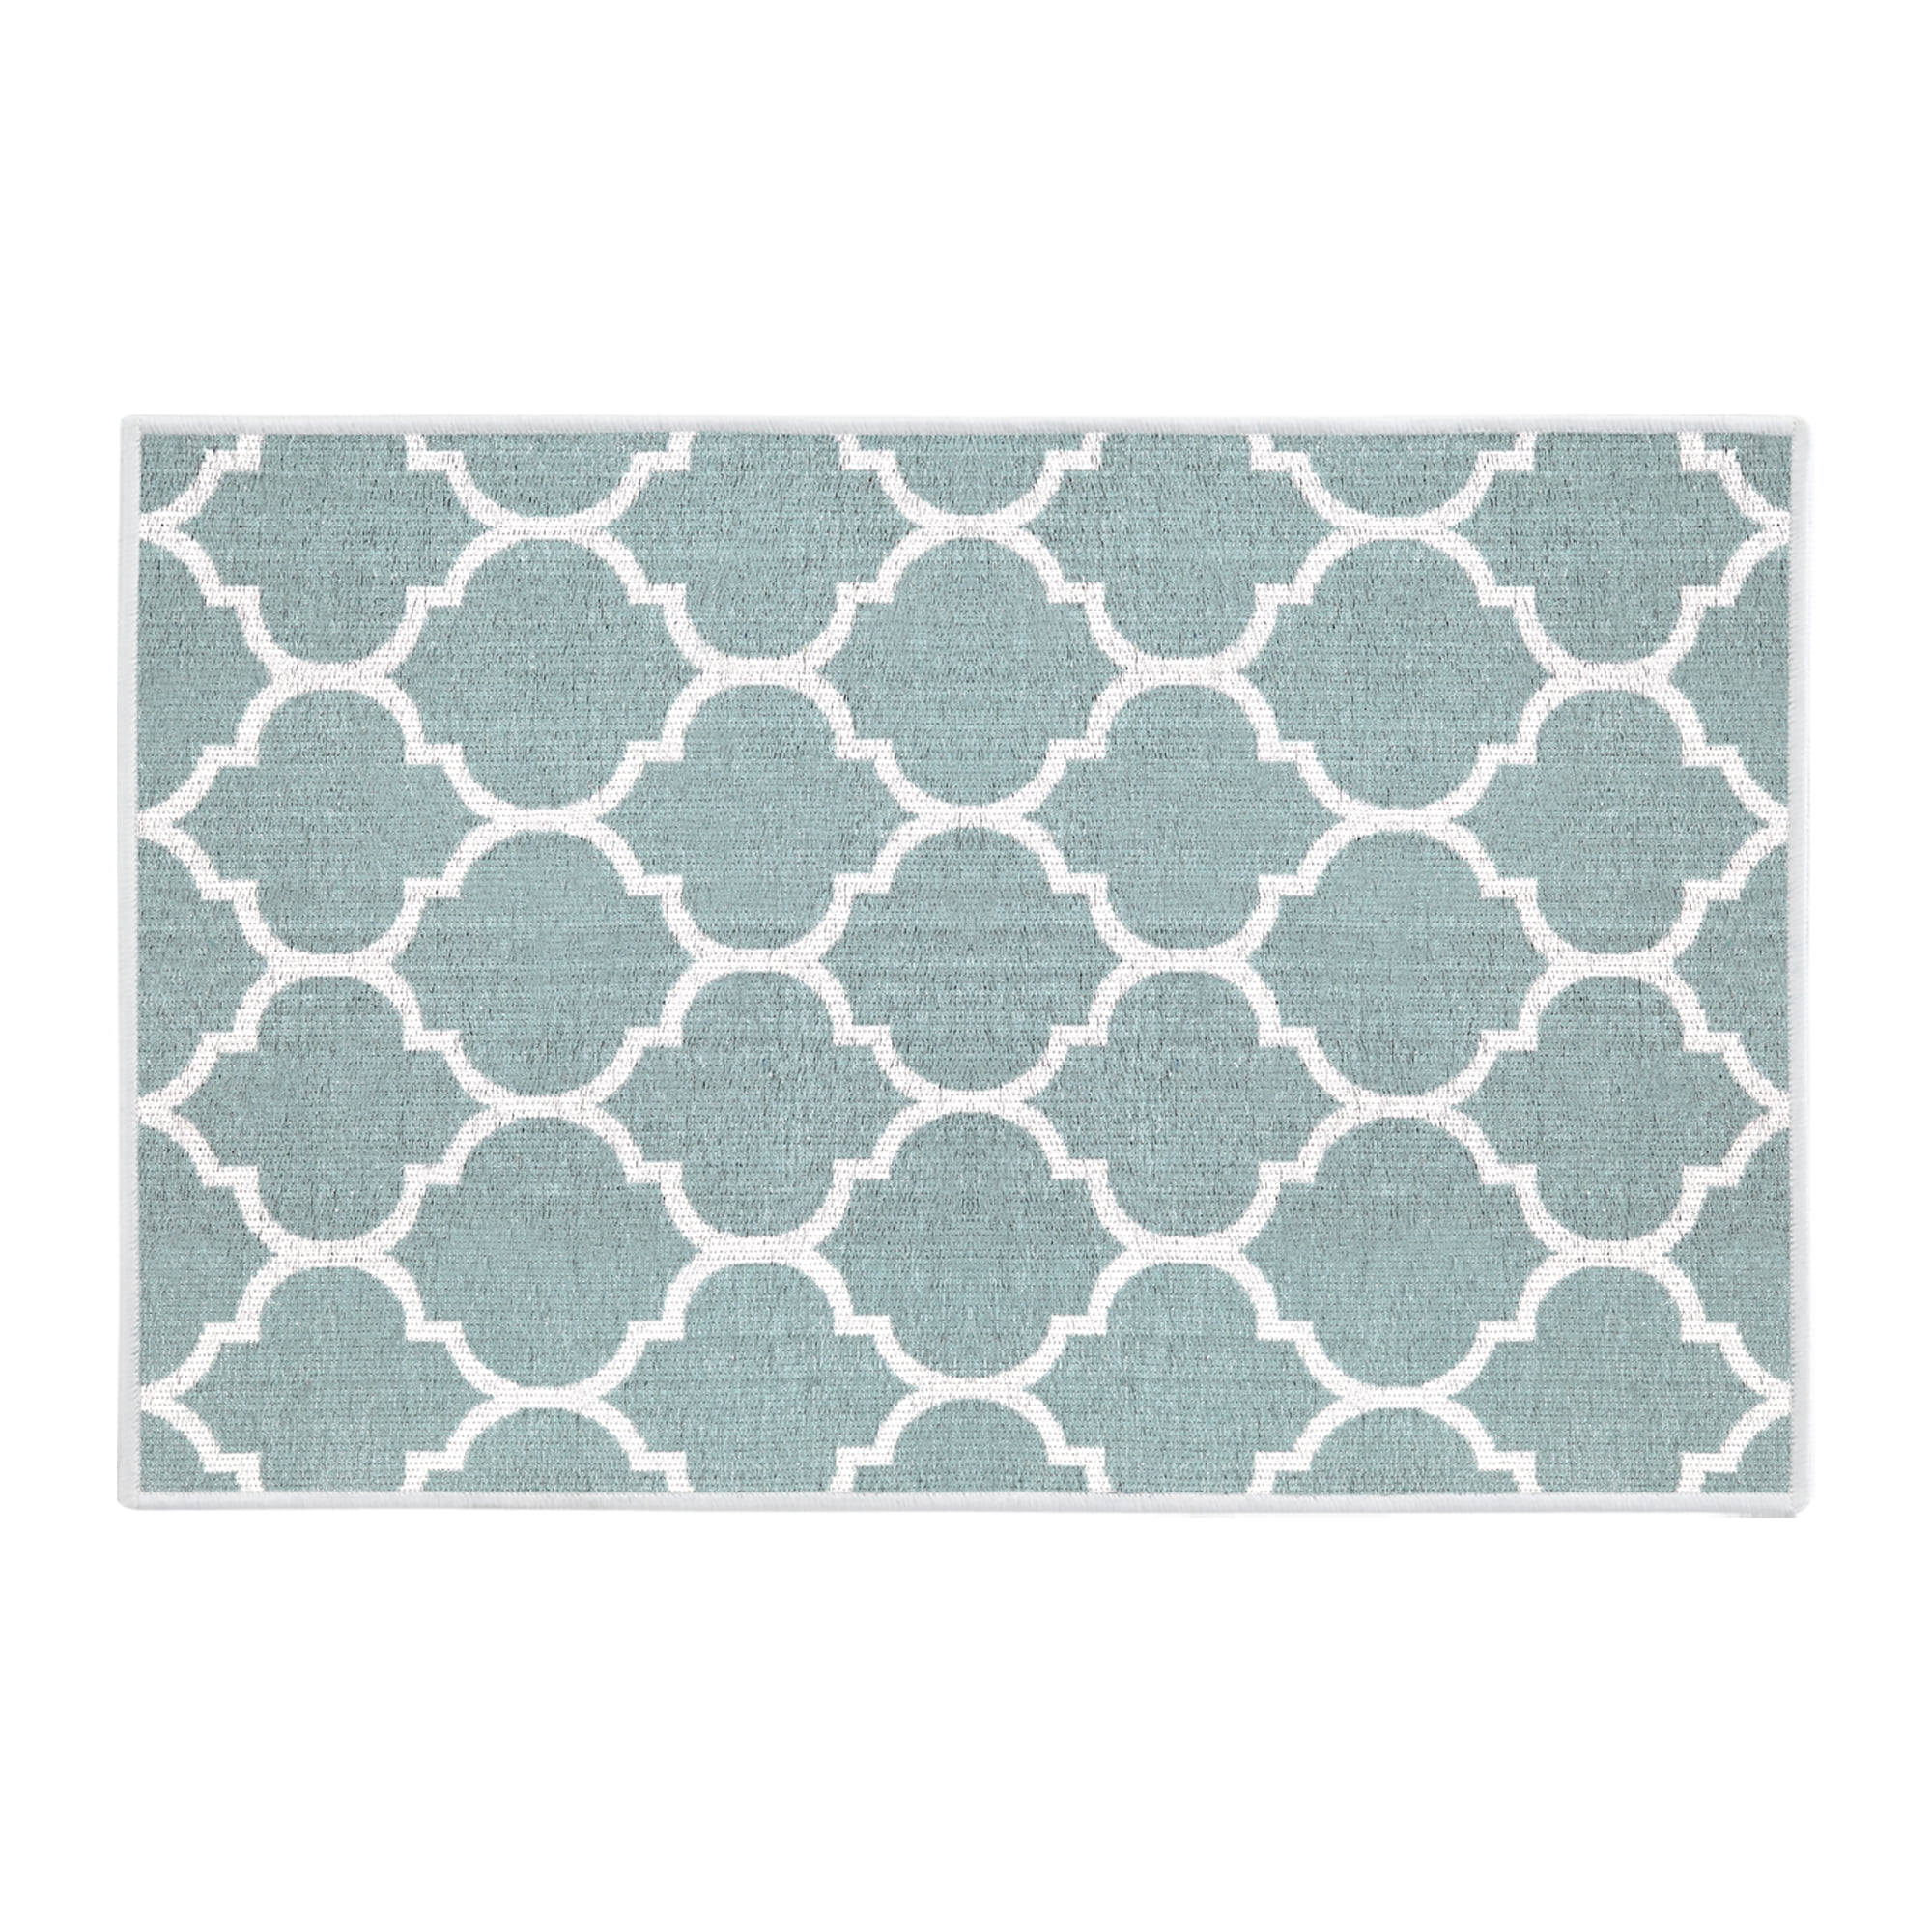 SussexHome Non-skid Ultra-thin Blended Cotton Runner Rug - 20 x